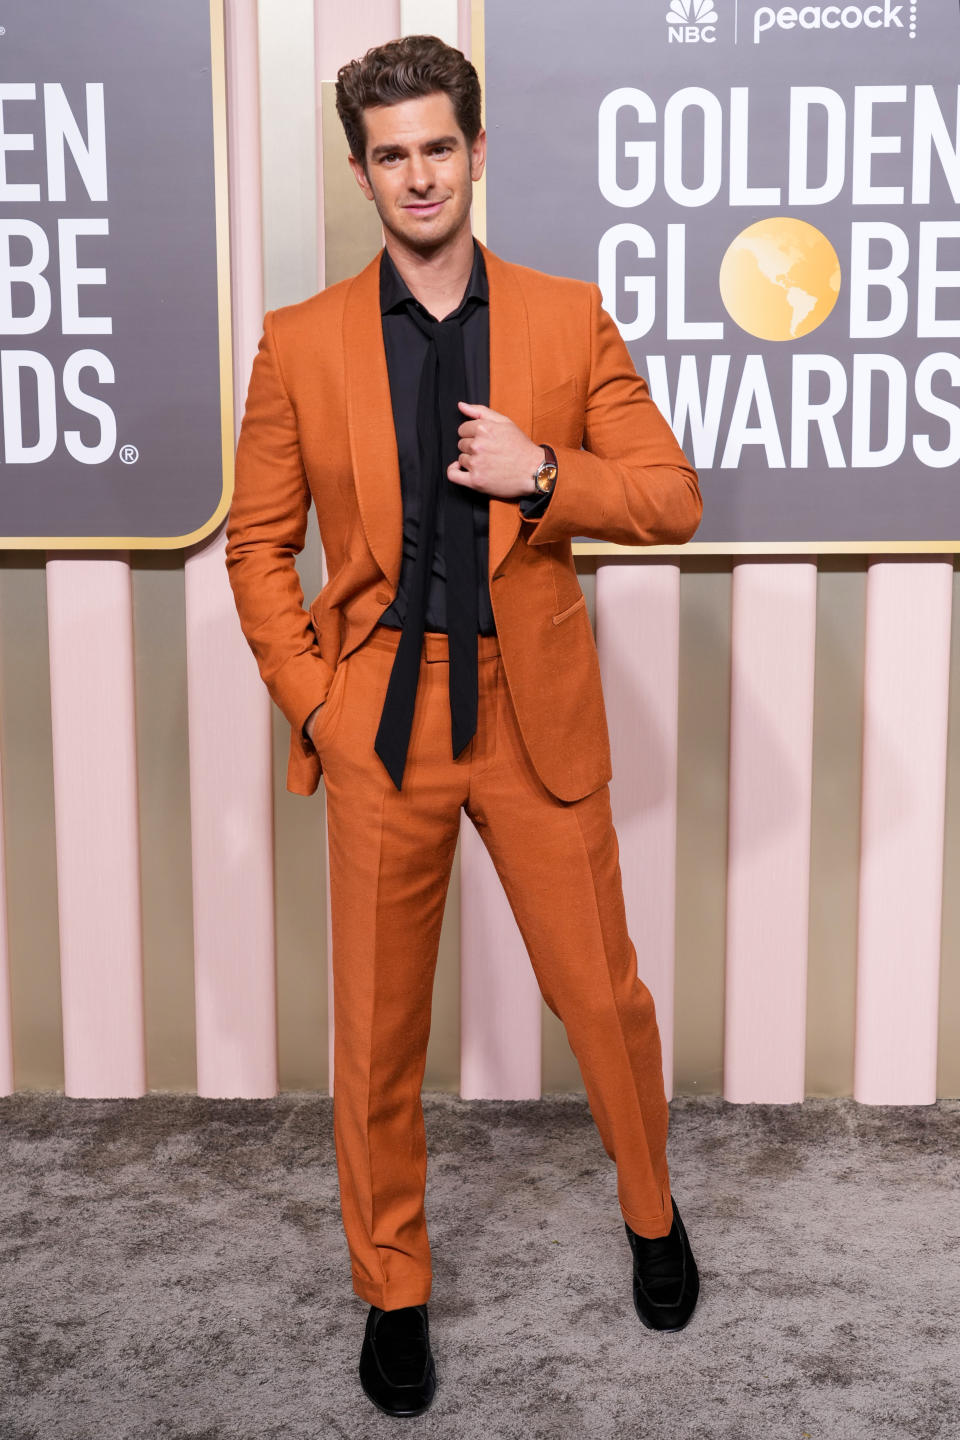 BEVERLY HILLS, CALIFORNIA - JANUARY 10: Andrew Garfield attends the 80th Annual Golden Globe Awards at The Beverly Hilton on January 10, 2023 in Beverly Hills, California. (Photo by Kevin Mazur/Getty Images)